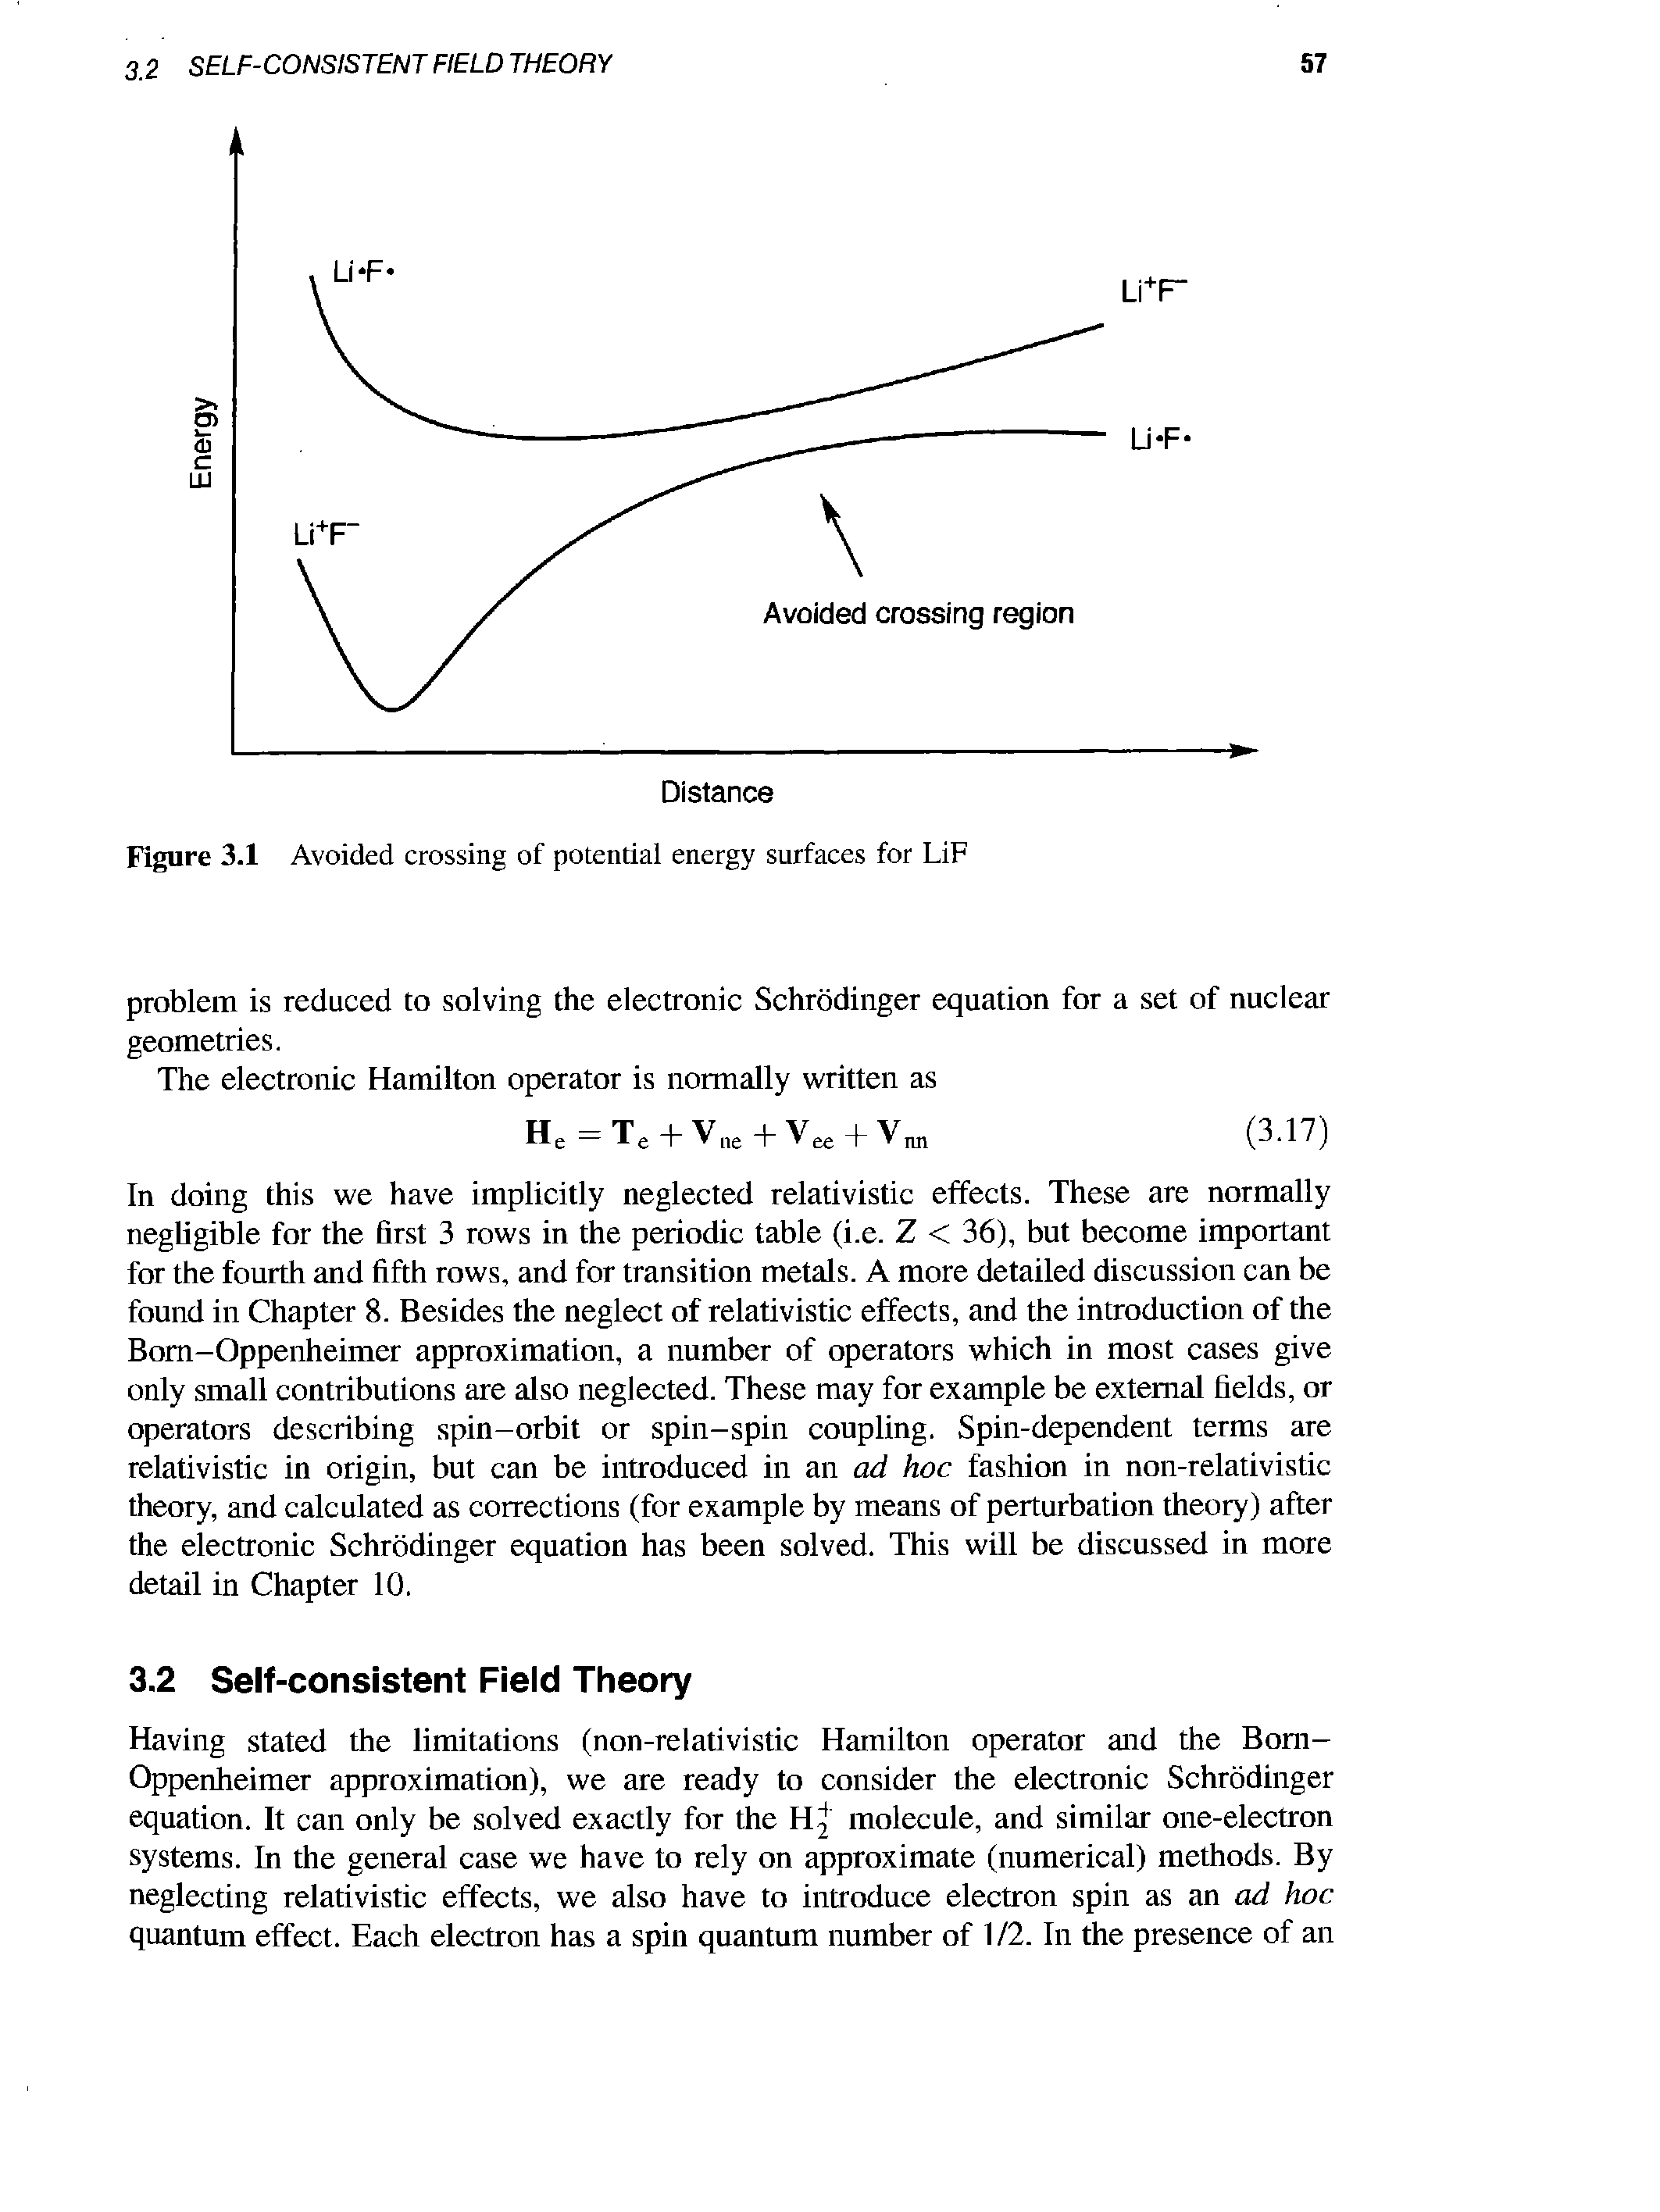 Figure 3.1 Avoided crossing of potential energy surfaces for LiF...